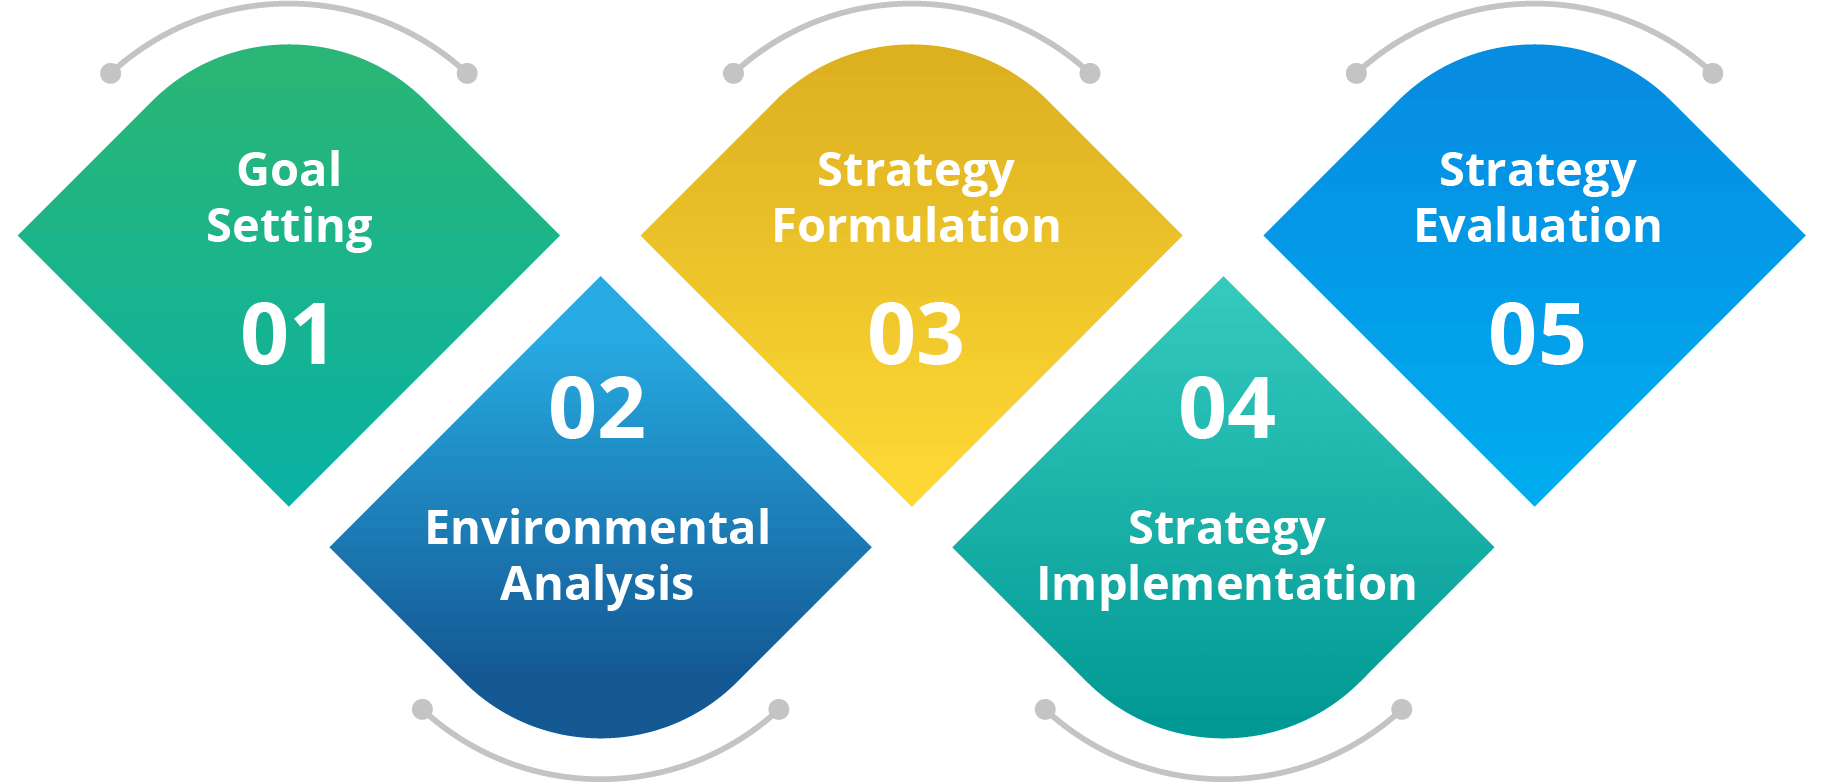 Stages of a Strategic Management Process